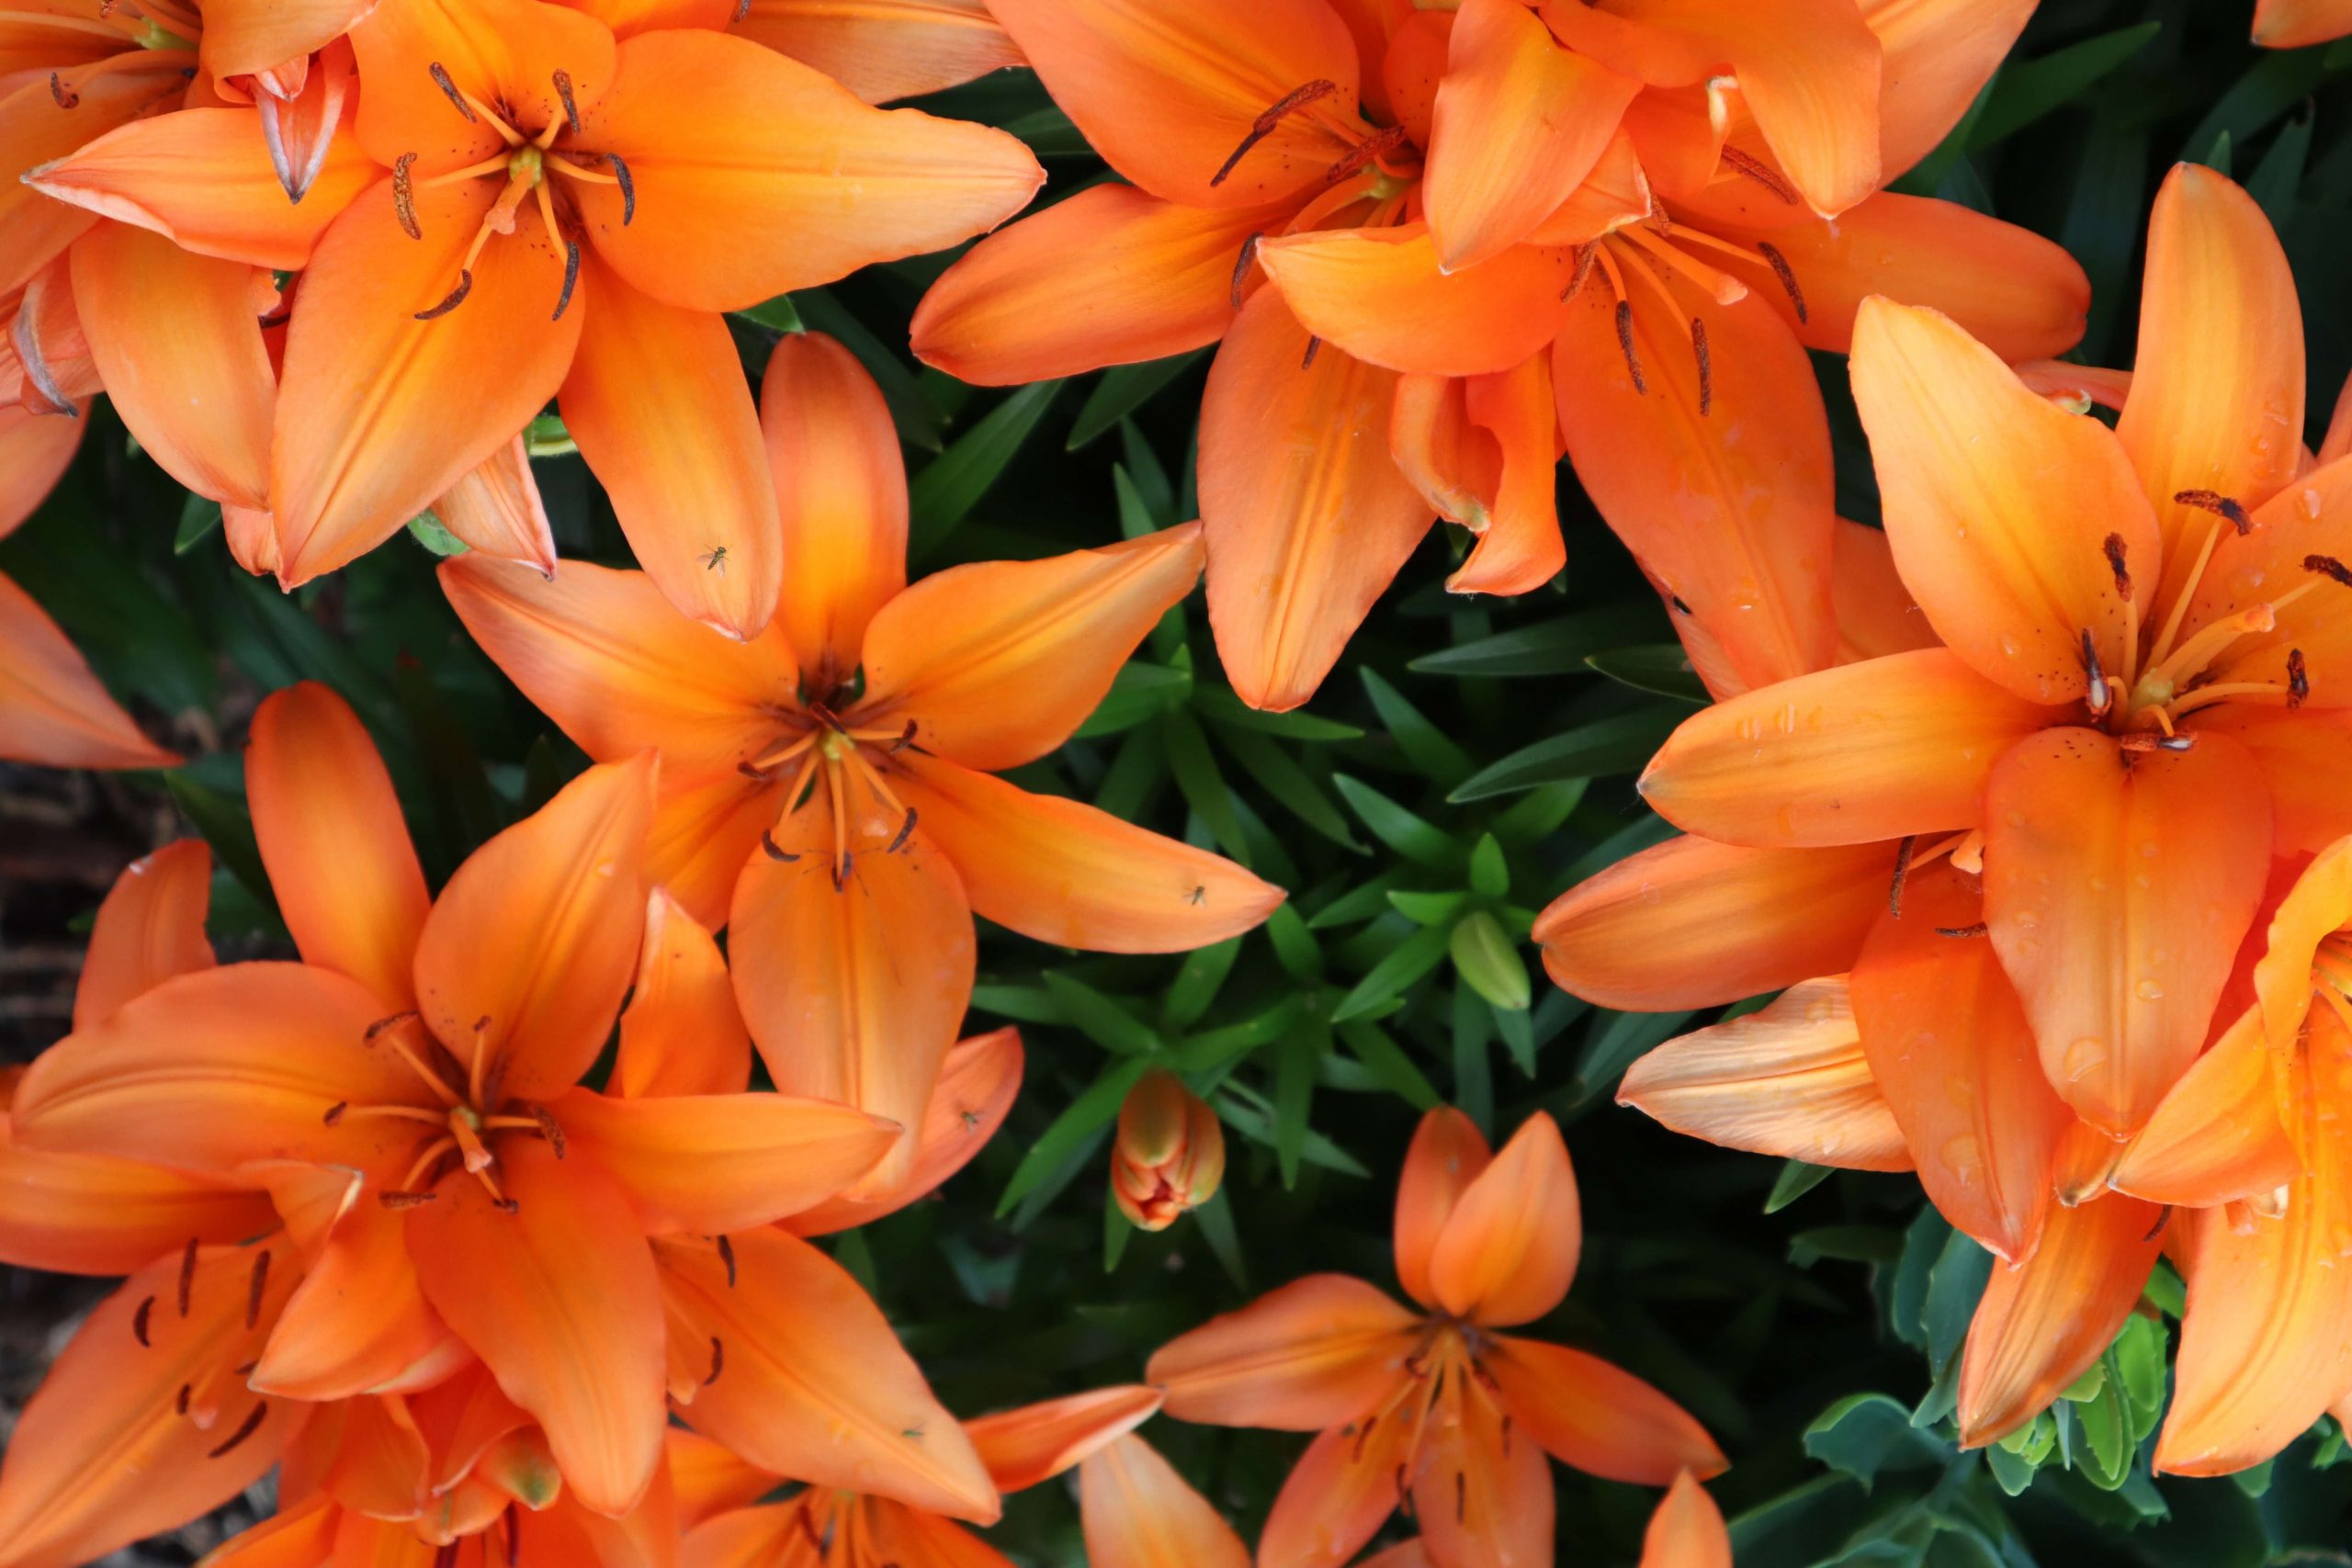 Plant of the month: Fascinating facts about Lilies | SA Garden and Home